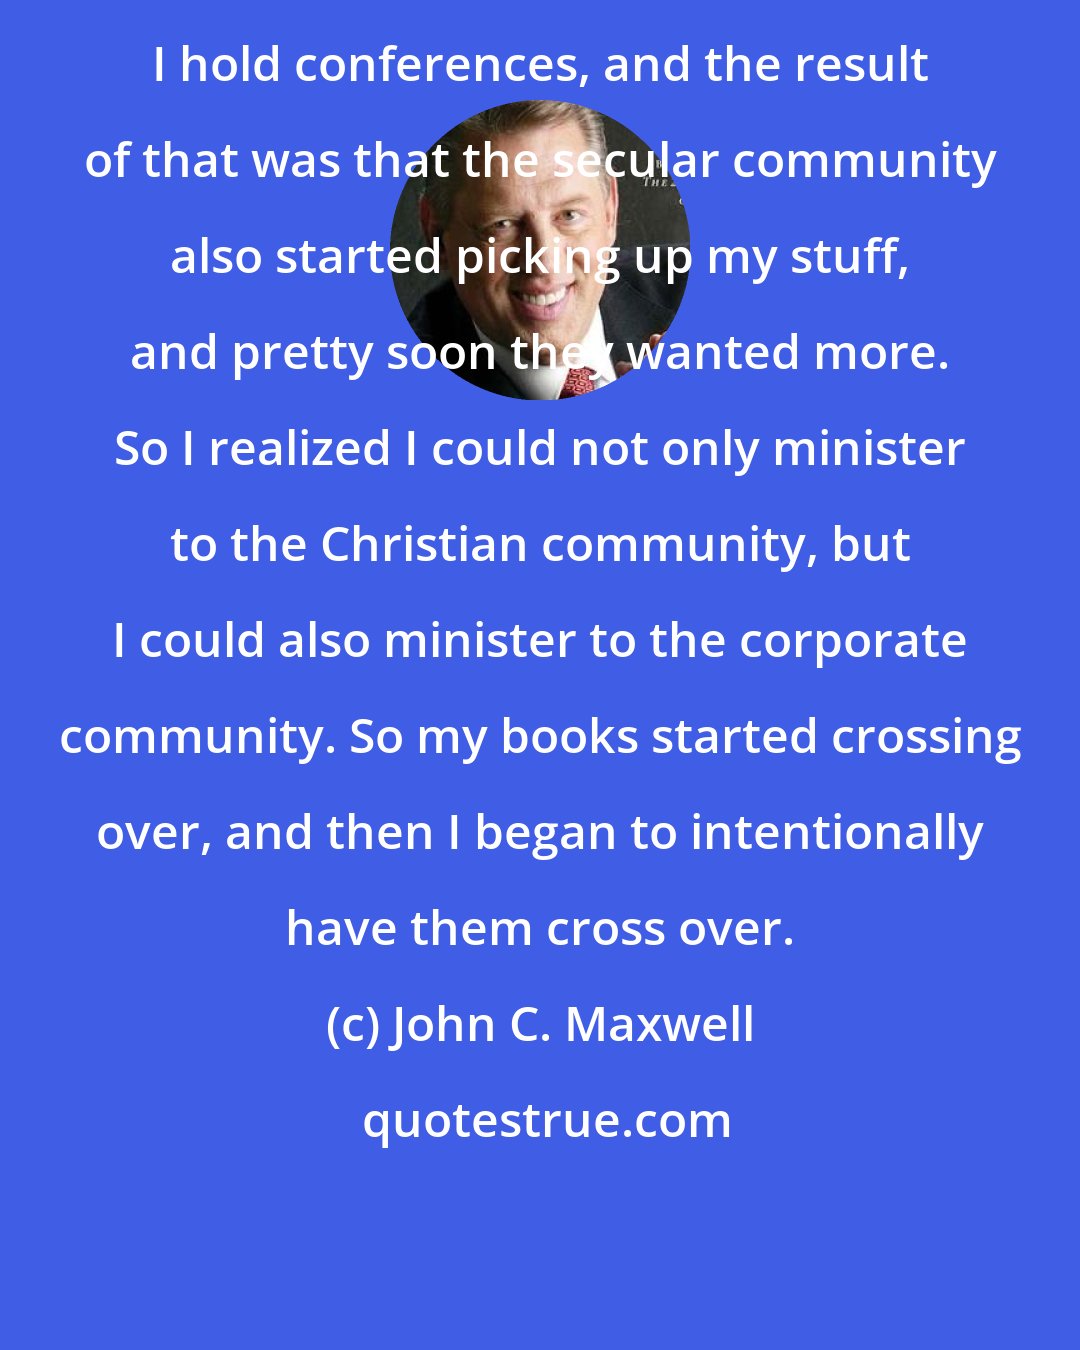 John C. Maxwell: I hold conferences, and the result of that was that the secular community also started picking up my stuff, and pretty soon they wanted more. So I realized I could not only minister to the Christian community, but I could also minister to the corporate community. So my books started crossing over, and then I began to intentionally have them cross over.